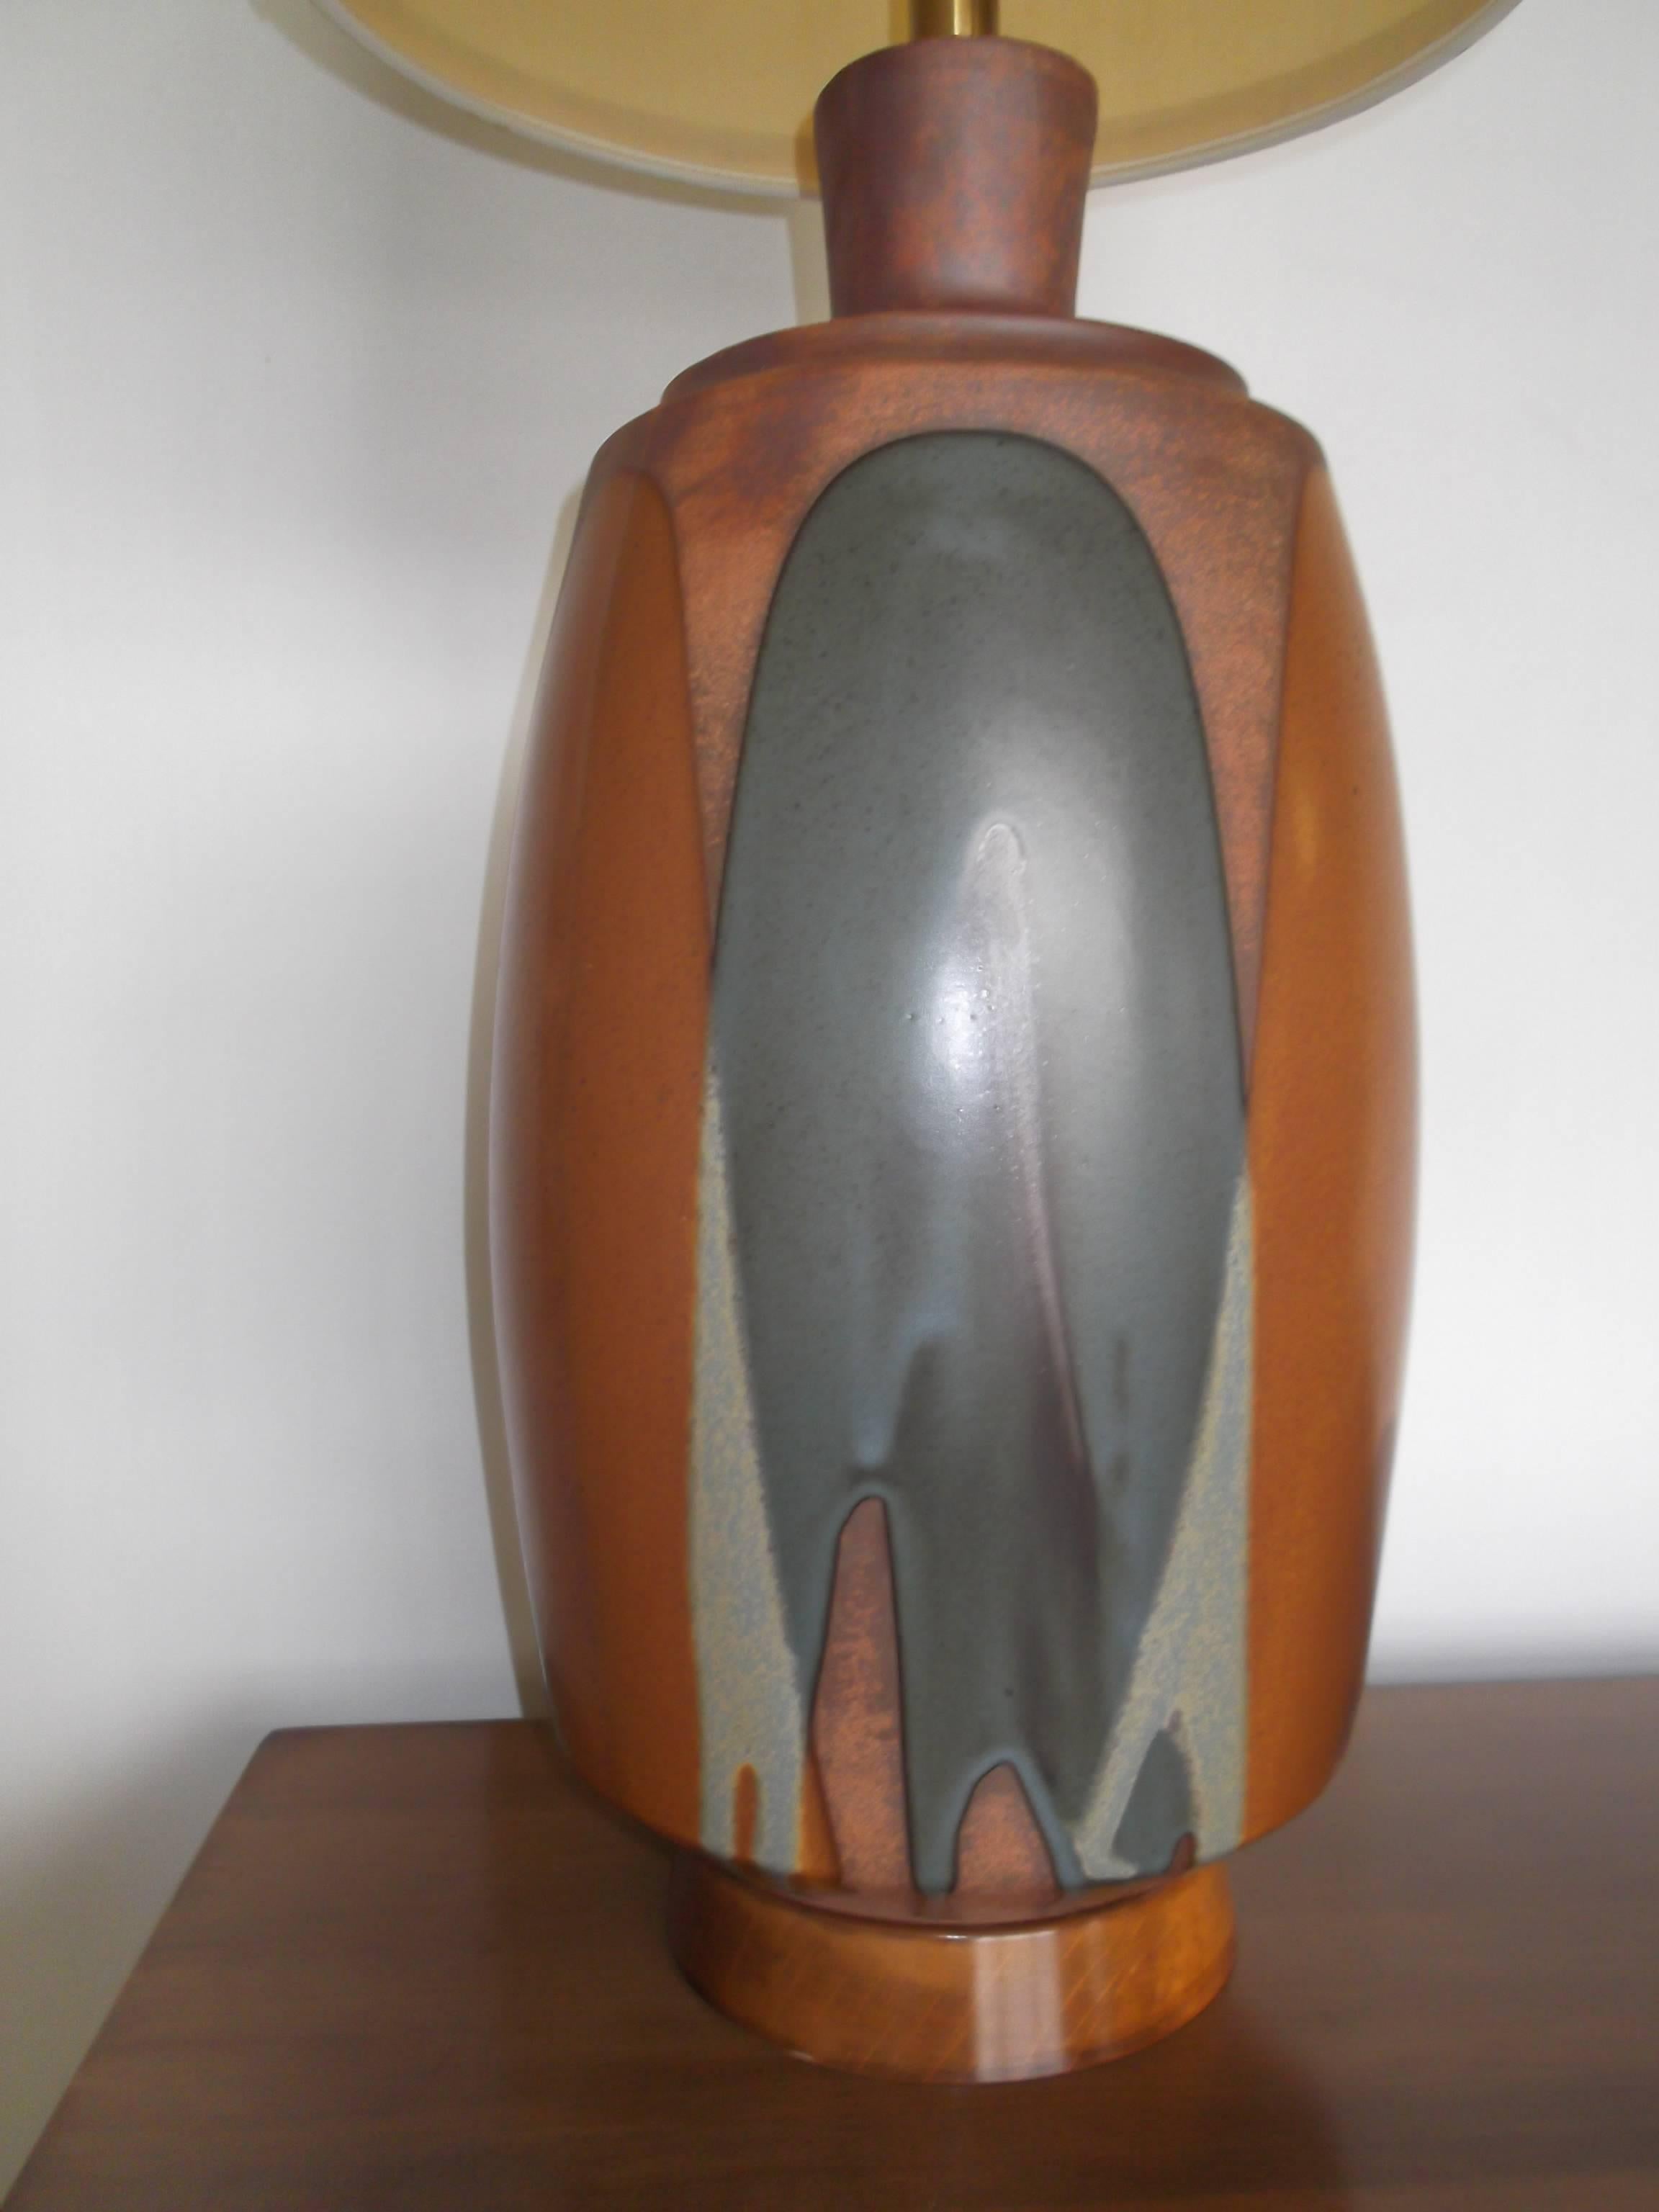 This is a fantastic large stoneware pottery lamp designed by David Cressey. It is very large with a nearly 11